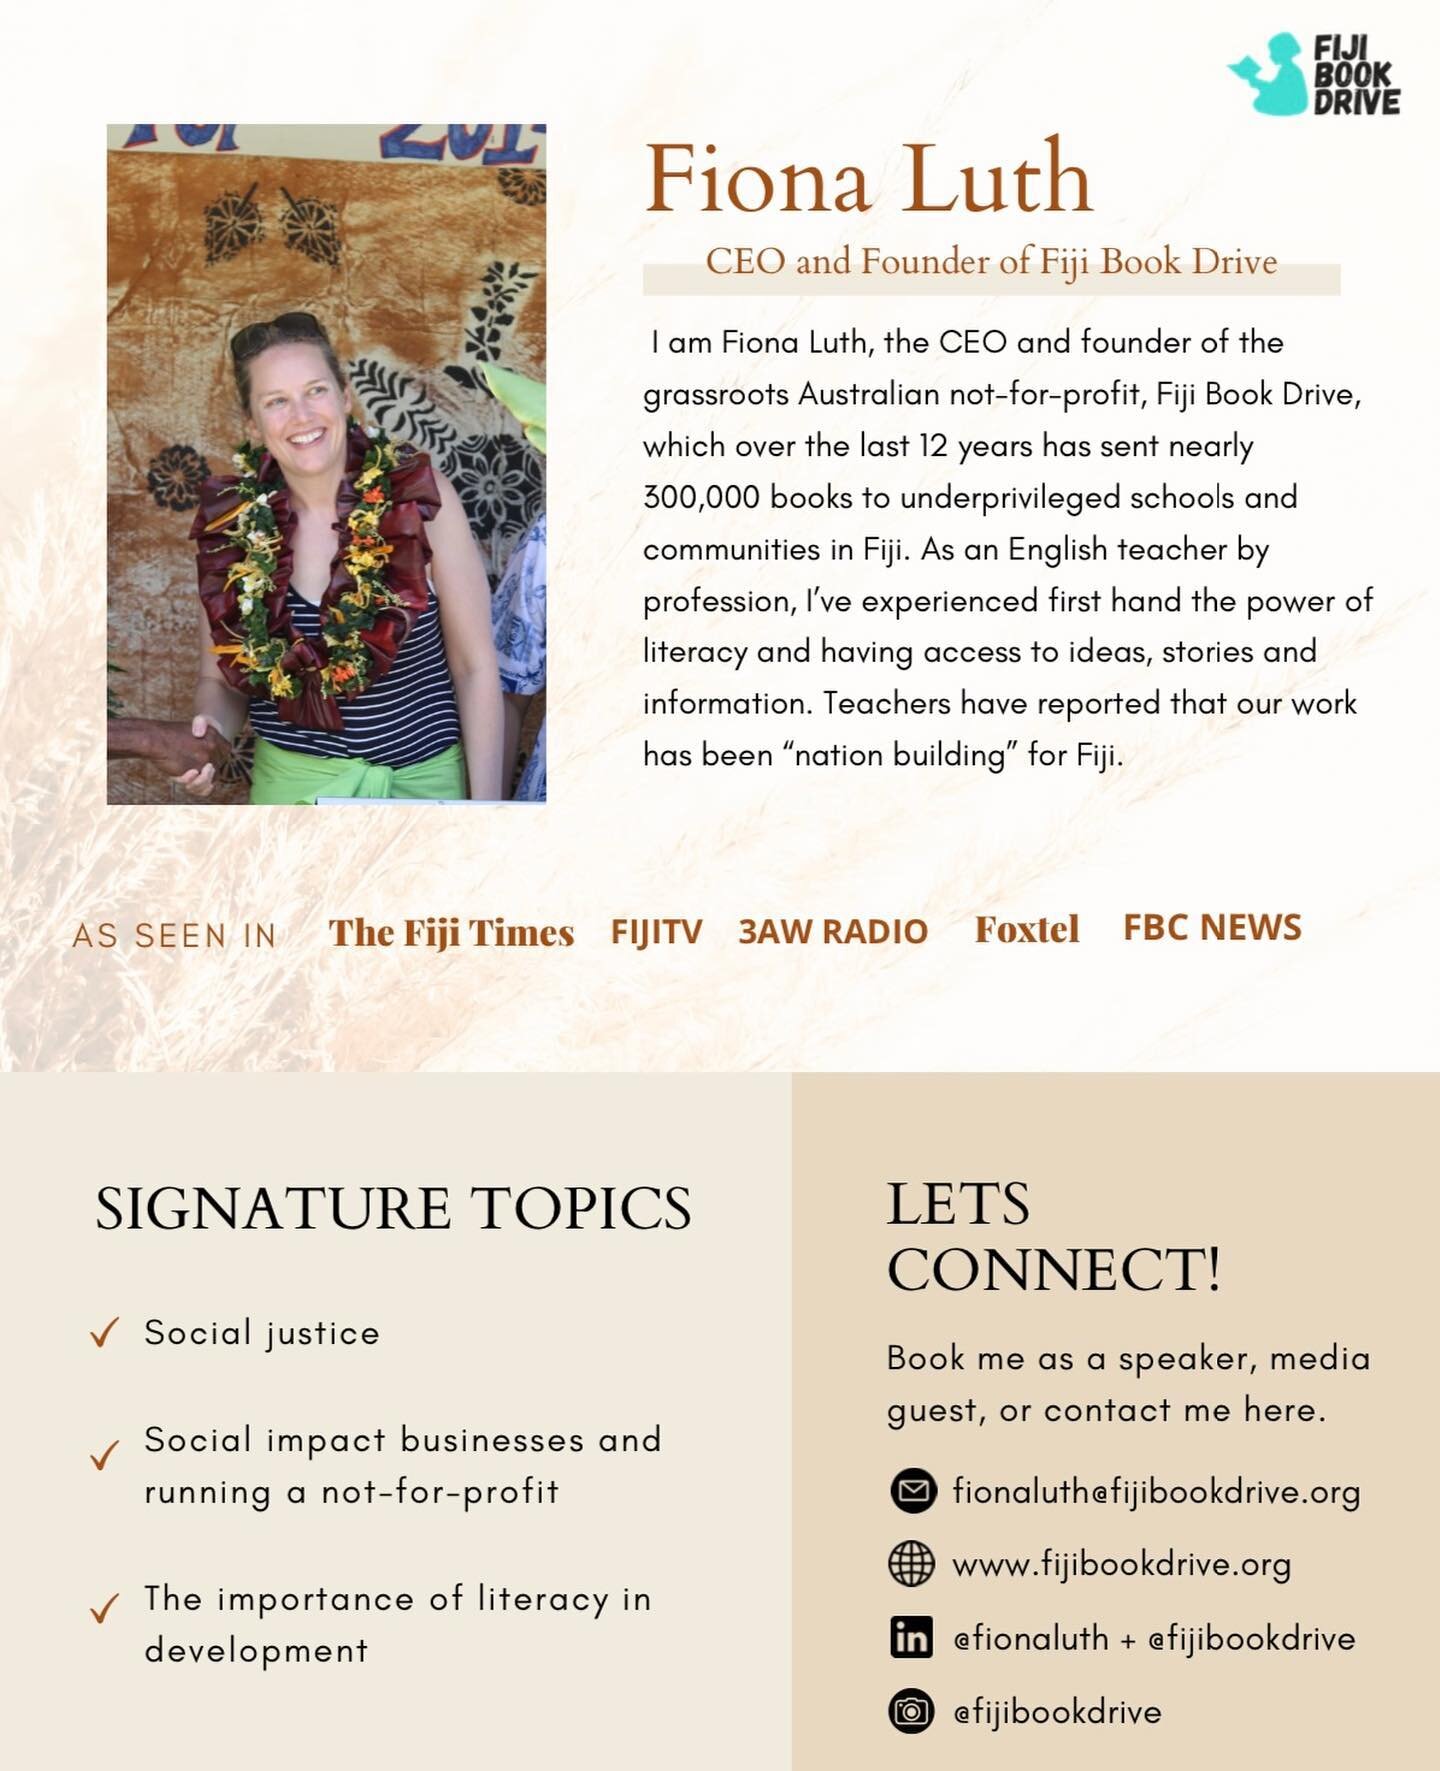 A friend of Fiona&rsquo;s attending the Fiji Book Drive Ladies lunch said the following after hearing Fiona speak: &ldquo;You should totally be a speaker!&rdquo; 

Fiona is pleased to announce that this is now happening!

Here are Fiona&rsquo;s singl